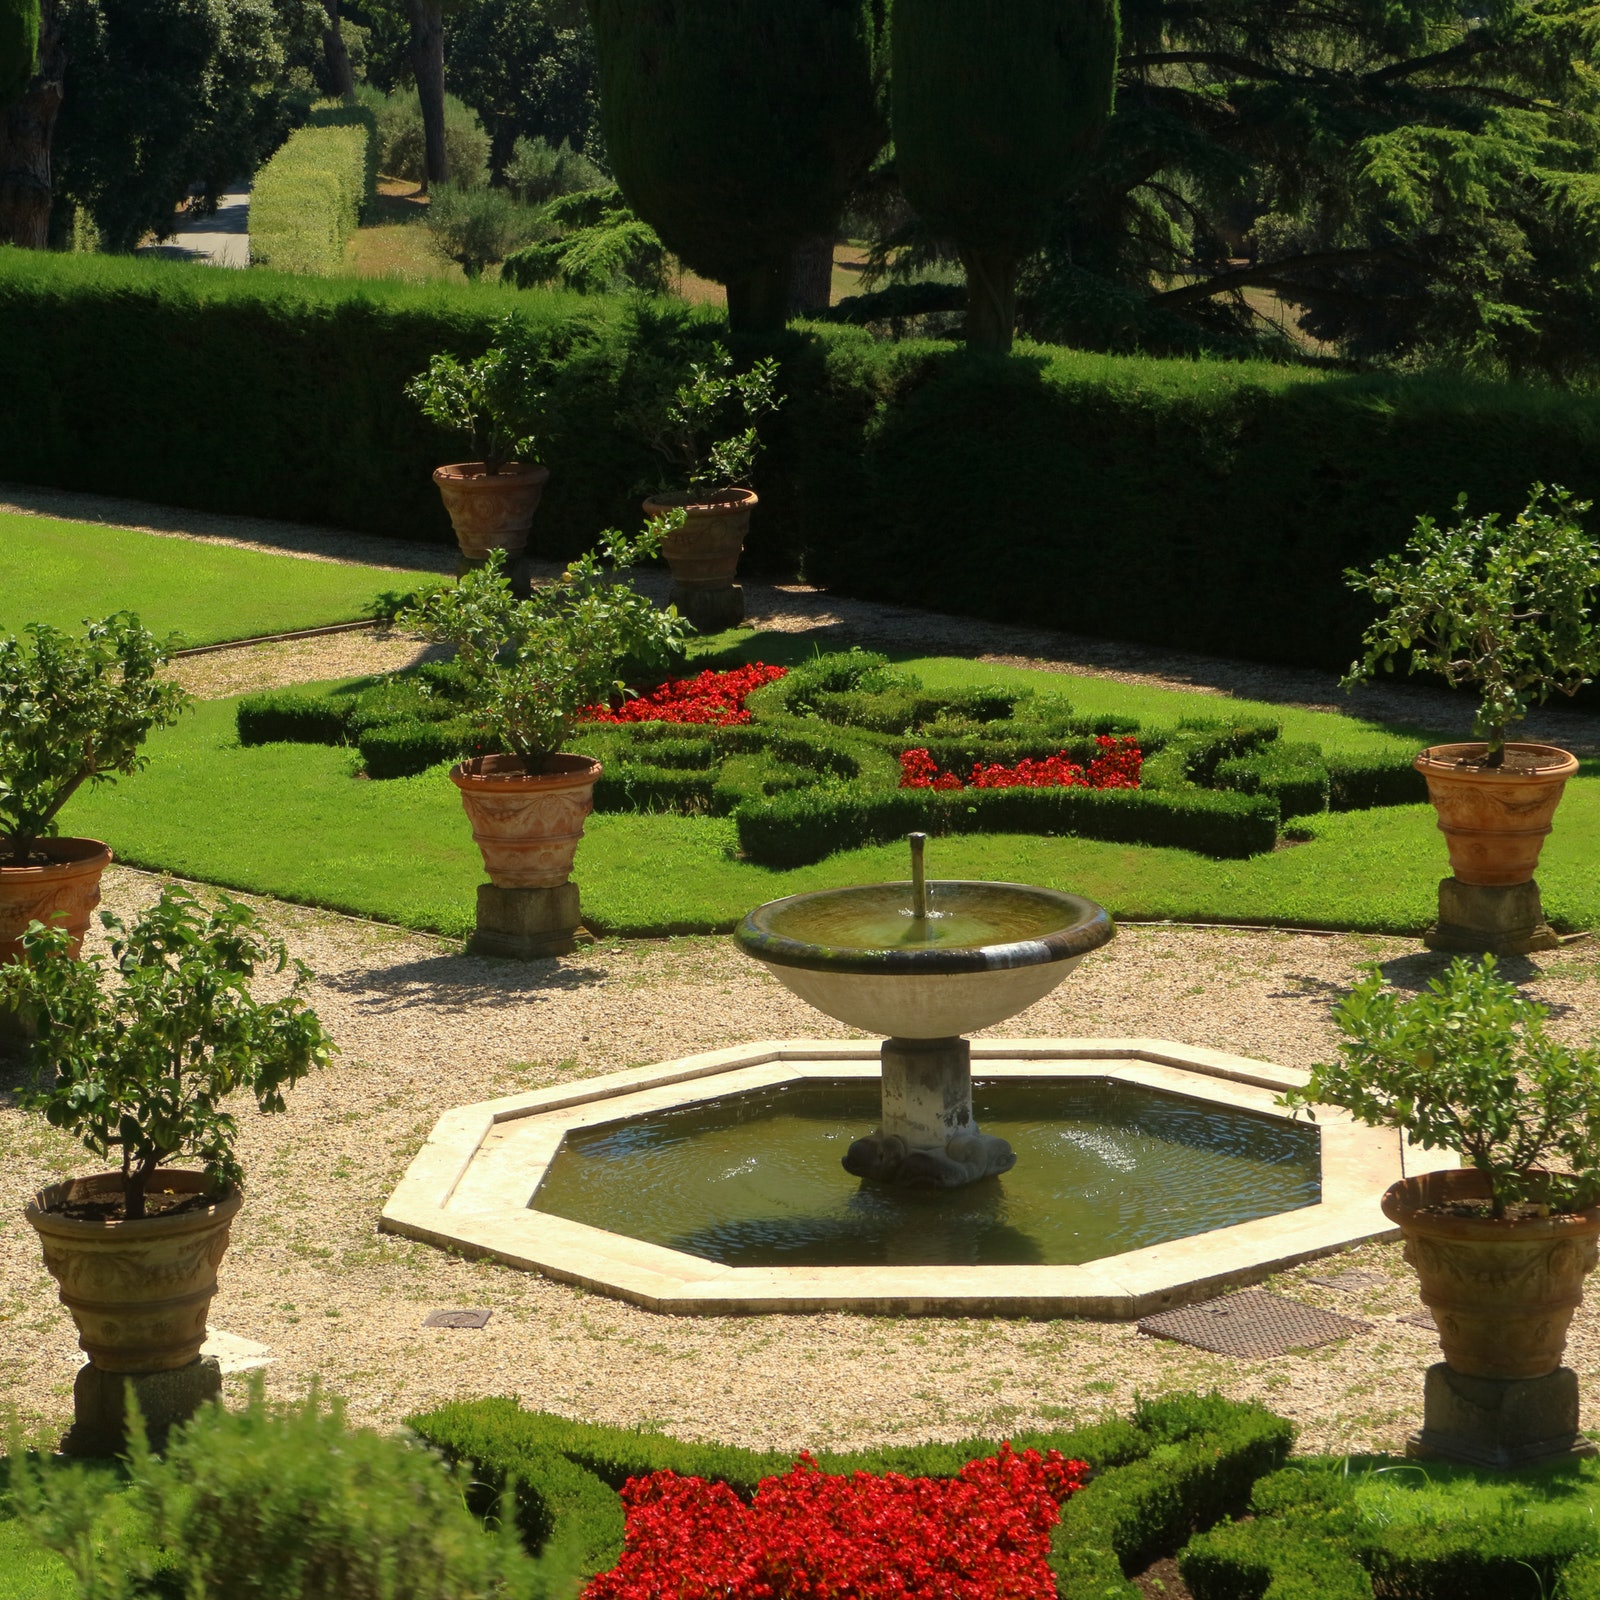 Papale Gardens & Palace at Castel Gandolfo in Italy